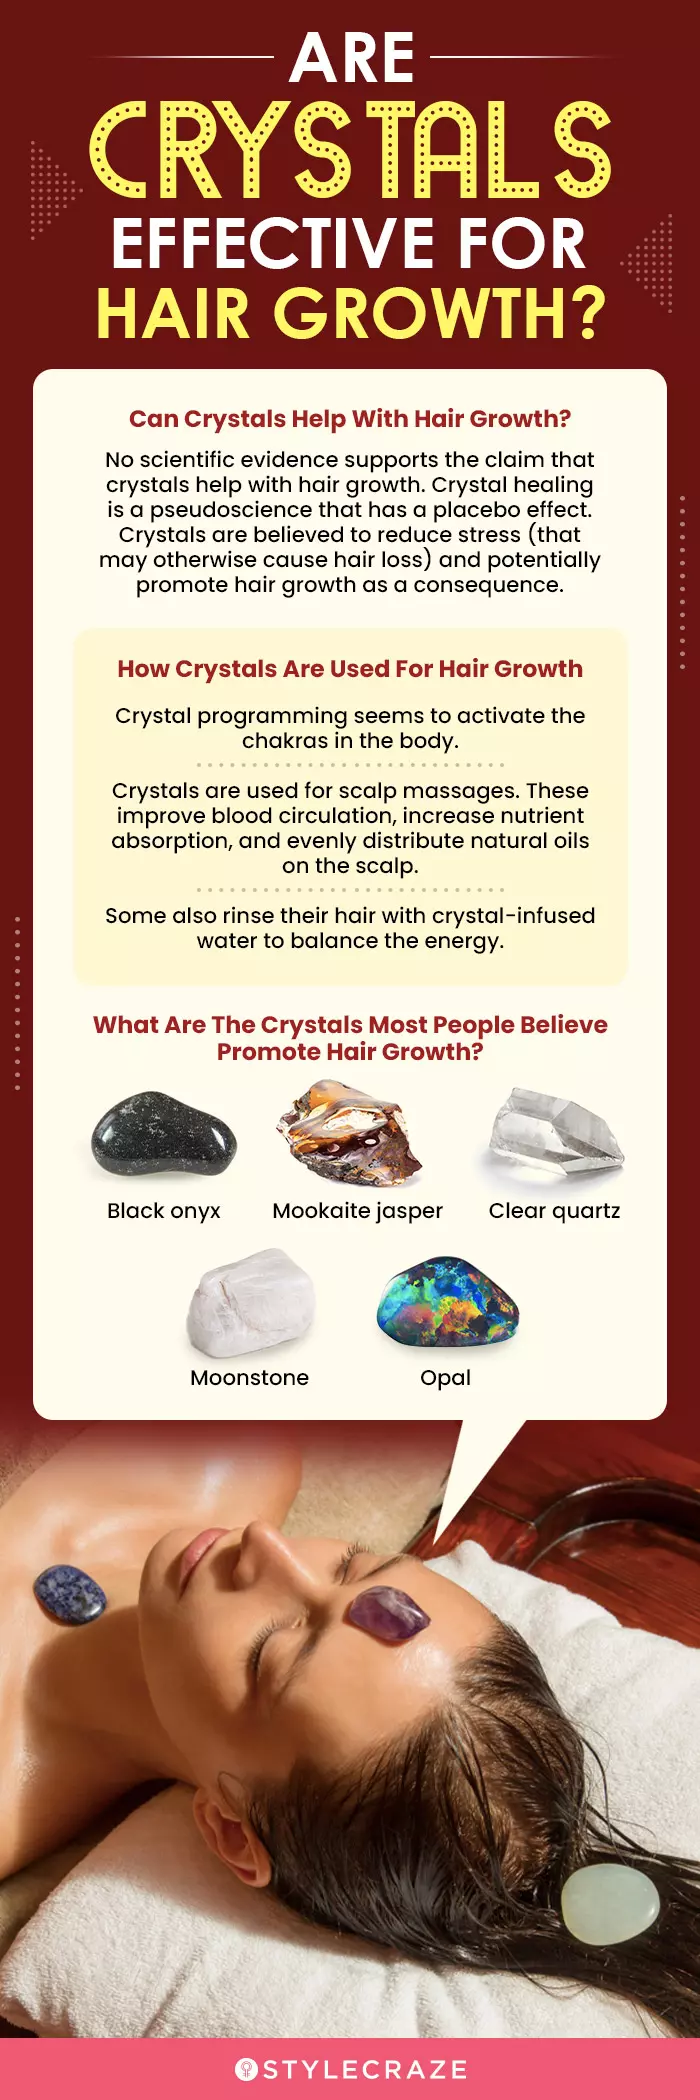 are crystals effective for hair growth (infographic)